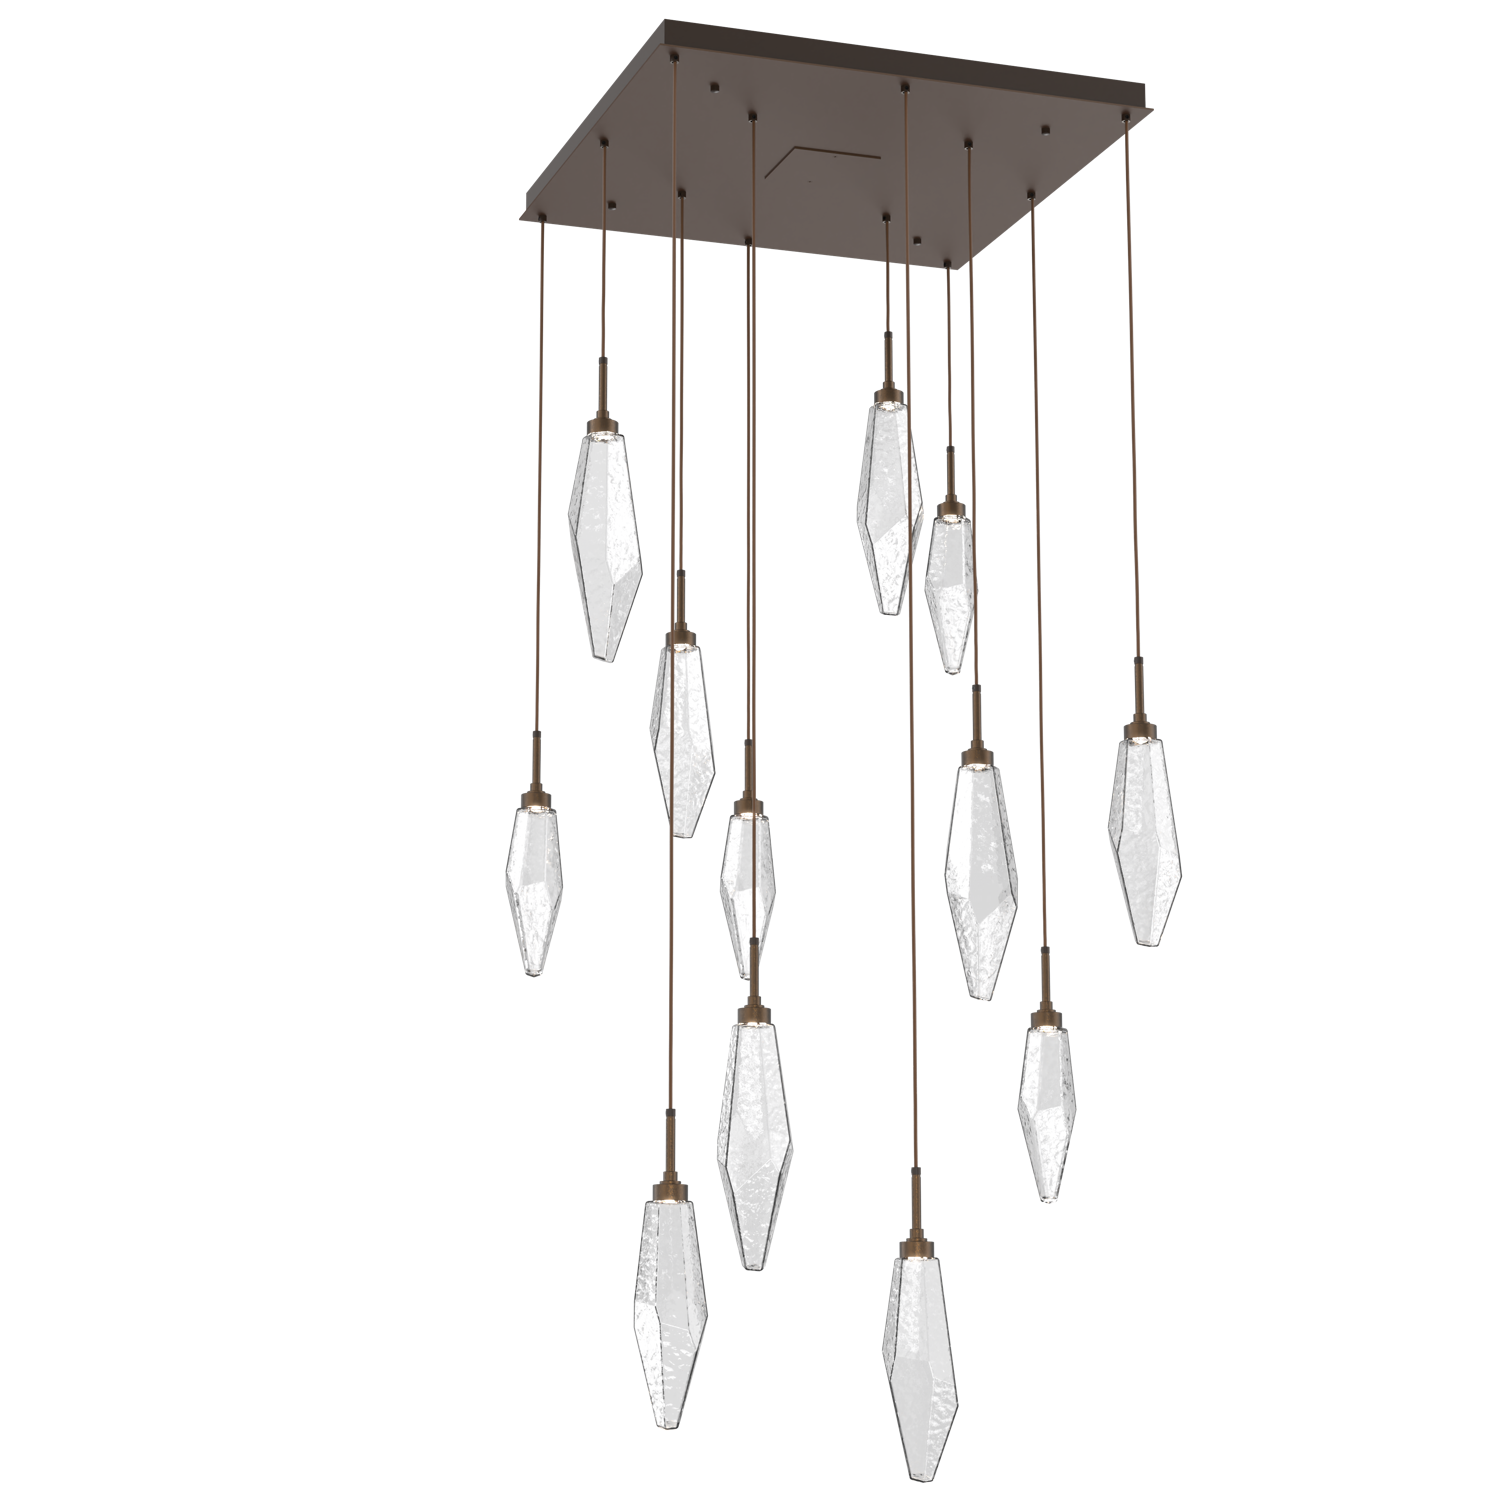 CHB0050-12-FB-CC-Hammerton-Studio-Rock-Crystal-12-light-square-pendant-chandelier-with-flat-bronze-finish-and-clear-glass-shades-and-LED-lamping